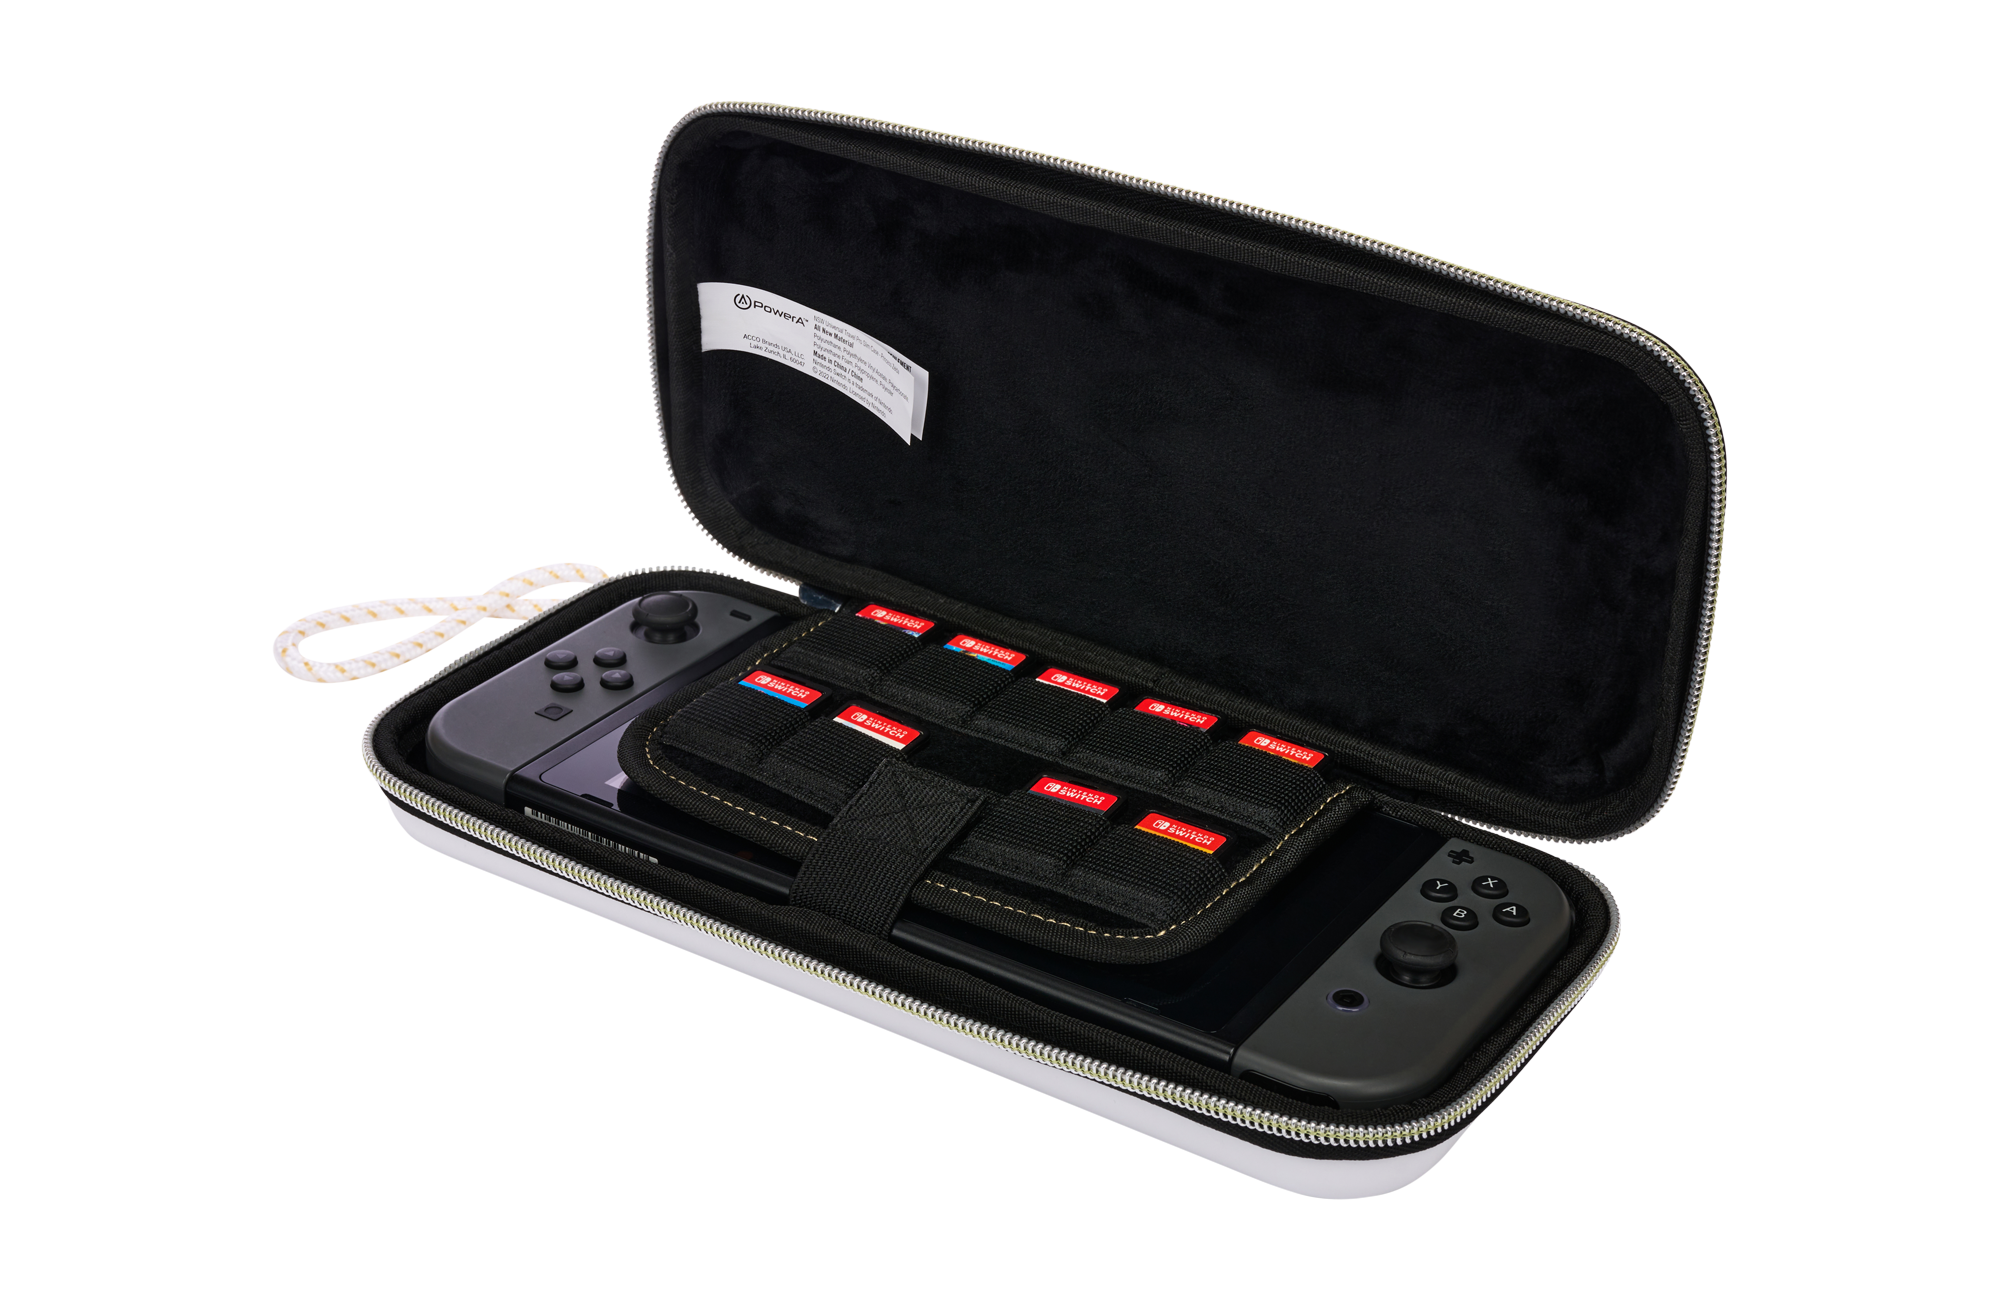 PowerA Slim Travel Pro Case for Nintendo Switch, Nintendo Switch  protection cases, covers & kits.